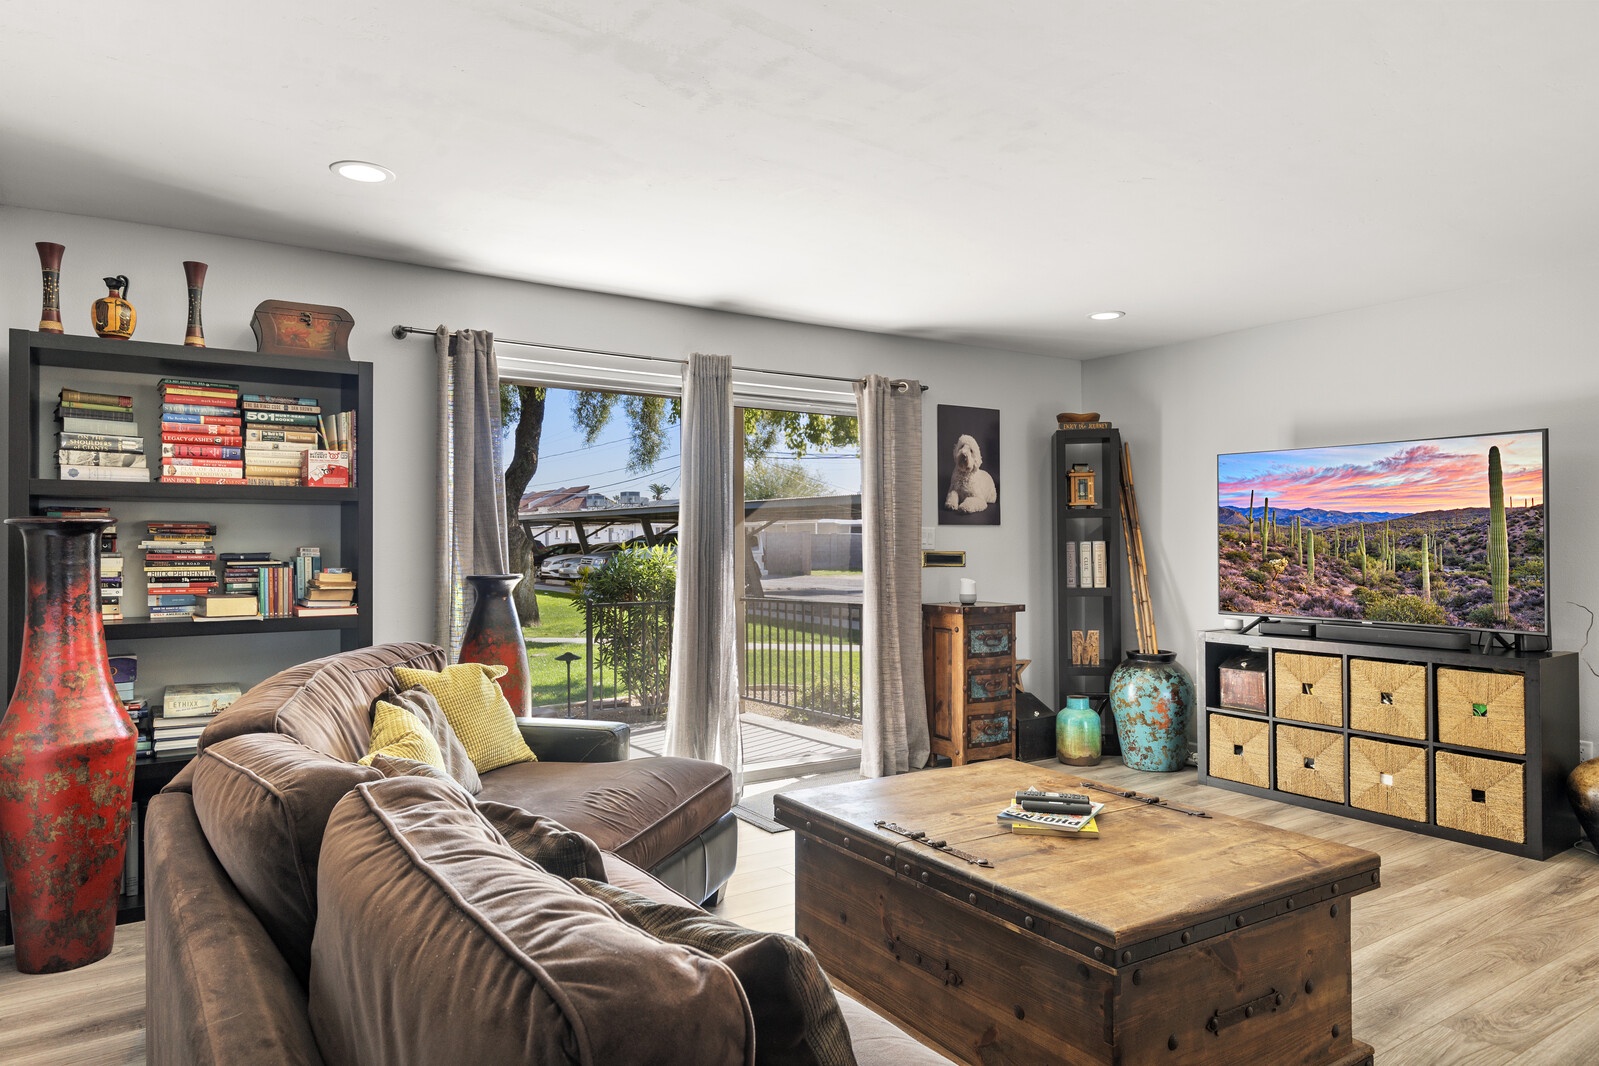 Flat screen tv with streaming services and views to the outside.